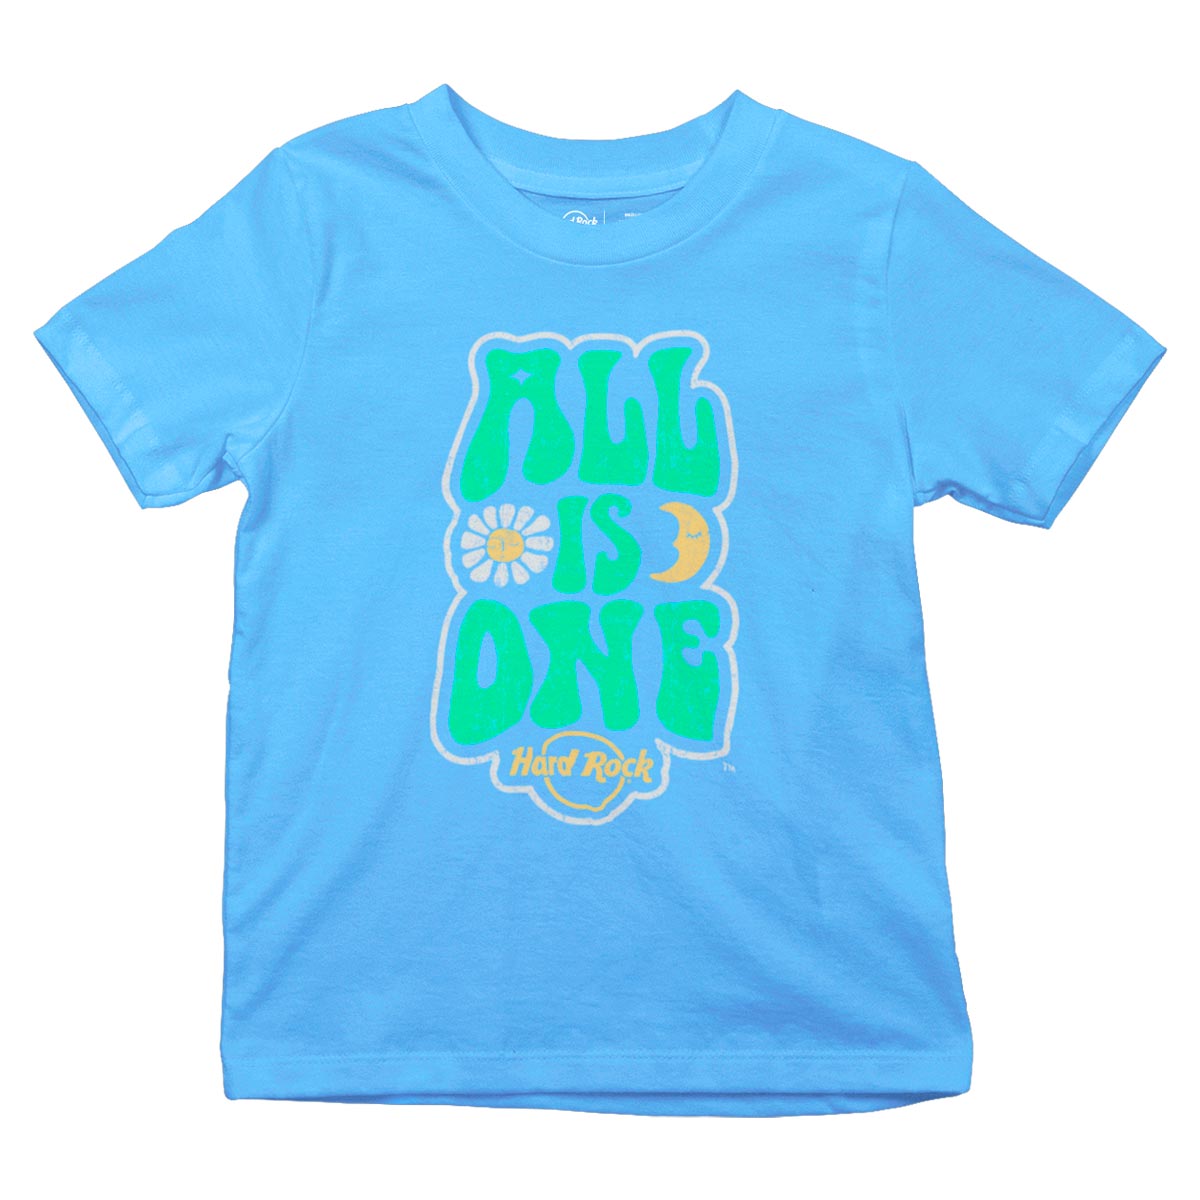 Hard Rock Youth Fit Festival Tee with All Is One in Sky Blue image number 3